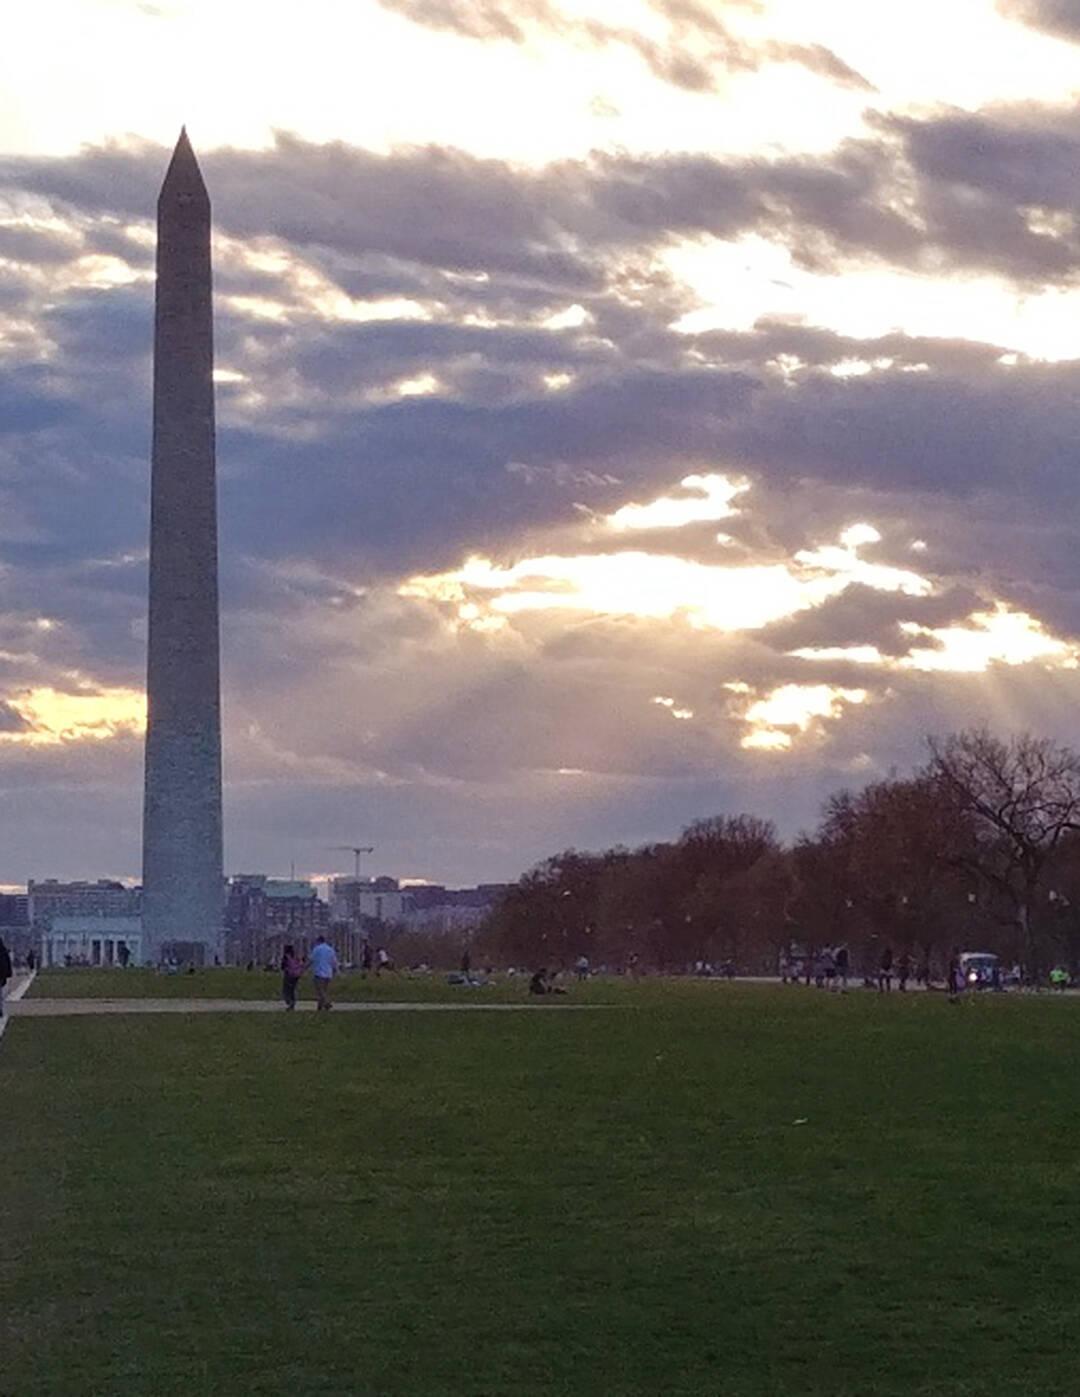 Another look at the majestic Washington Monument.